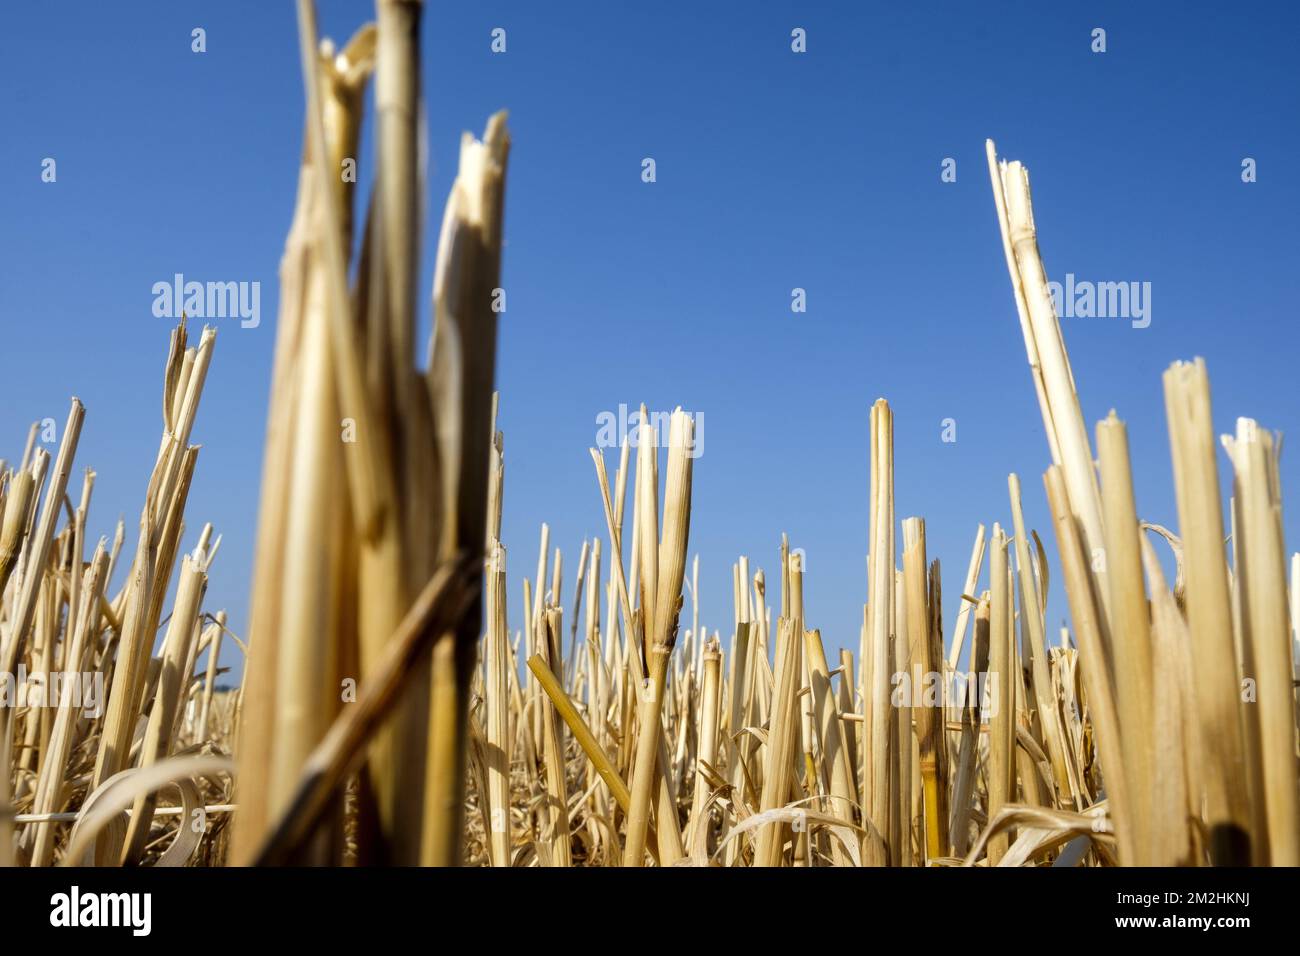 Because of the heat wave, the wheat are cutted very soon in the season and the hay are collected | Les bles sont coupes tres tot dans la saison cette anne. La paille a ete recoltee en avance. 05/08/2018 Stock Photo